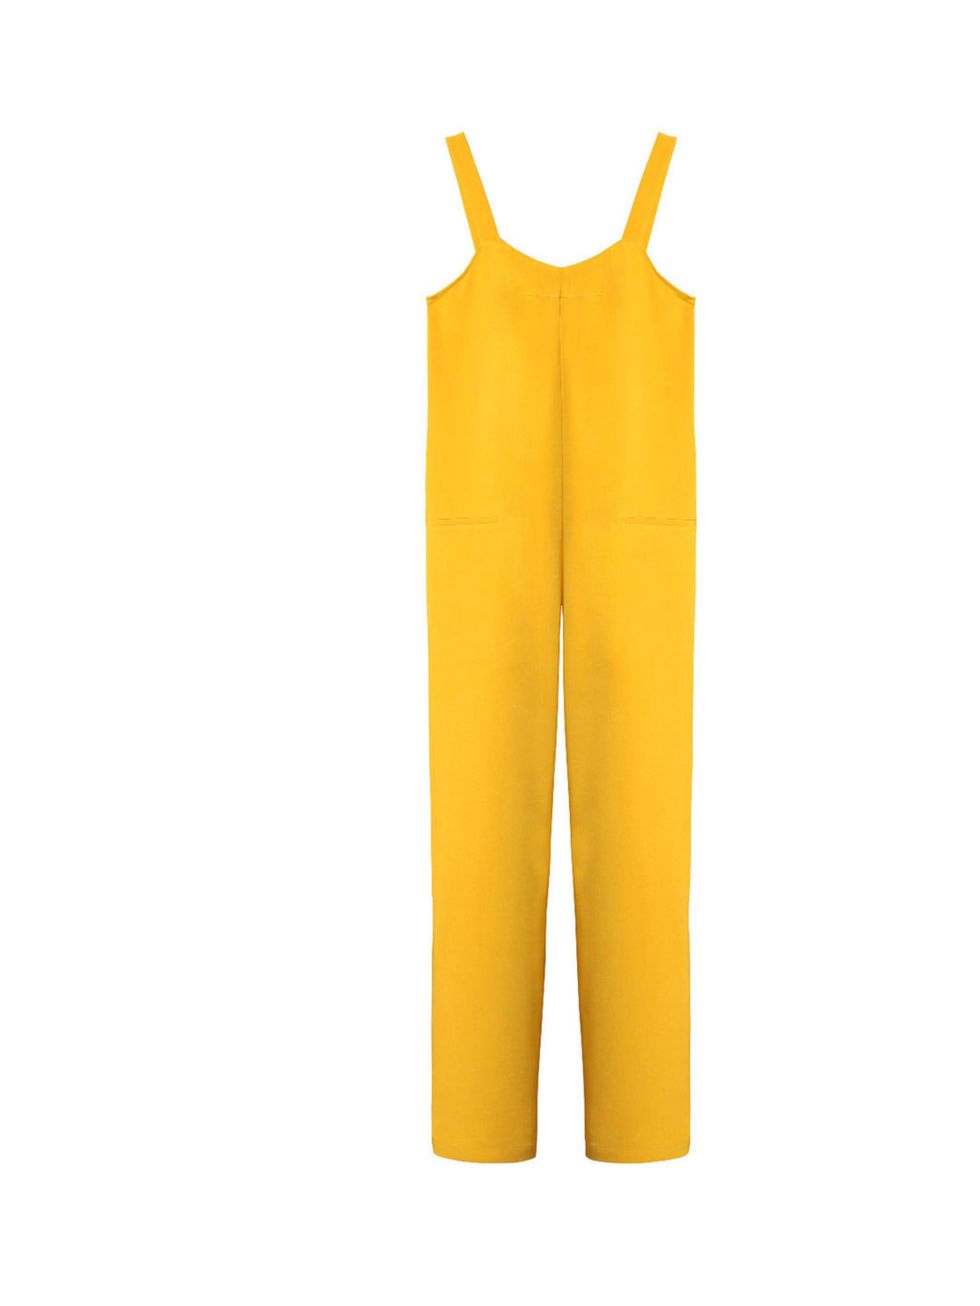 <p>Stand out amidst the sea of floaty dresses in a directional silk jumpsuit. </p><p>Jumpsuit, £500, by <a href="http://marinalondon.com/product/manrepeller/">Marina London</a></p>